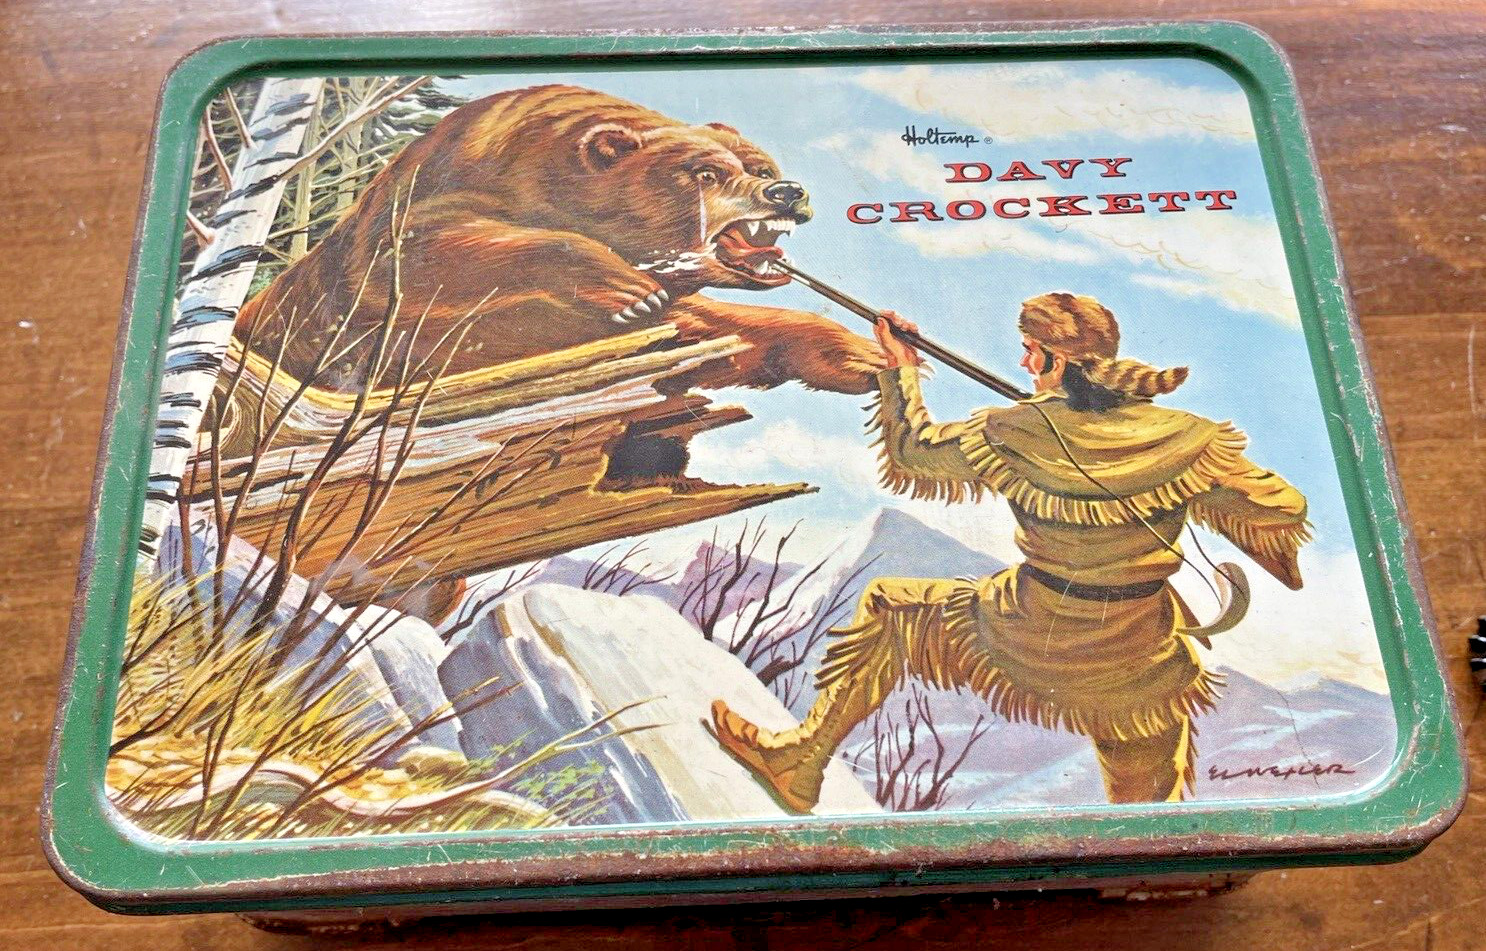 Vintage 1955 Davy Crockett Metal Lunchbox By Holtemp/American Thermos-697.24